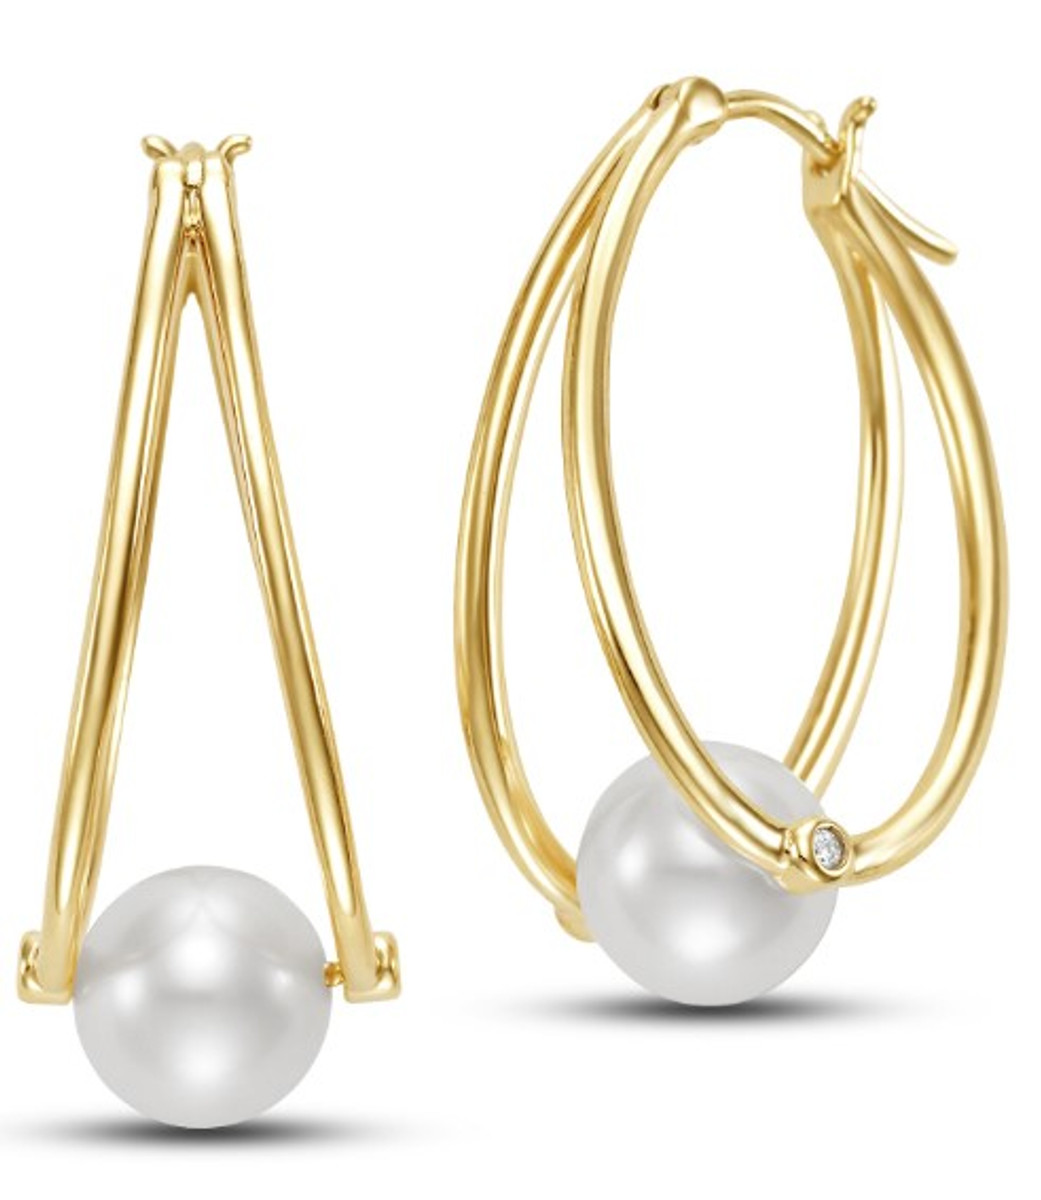 Hyde Park Collection 14K Yellow Gold Pearl Hoop Earrings-58546